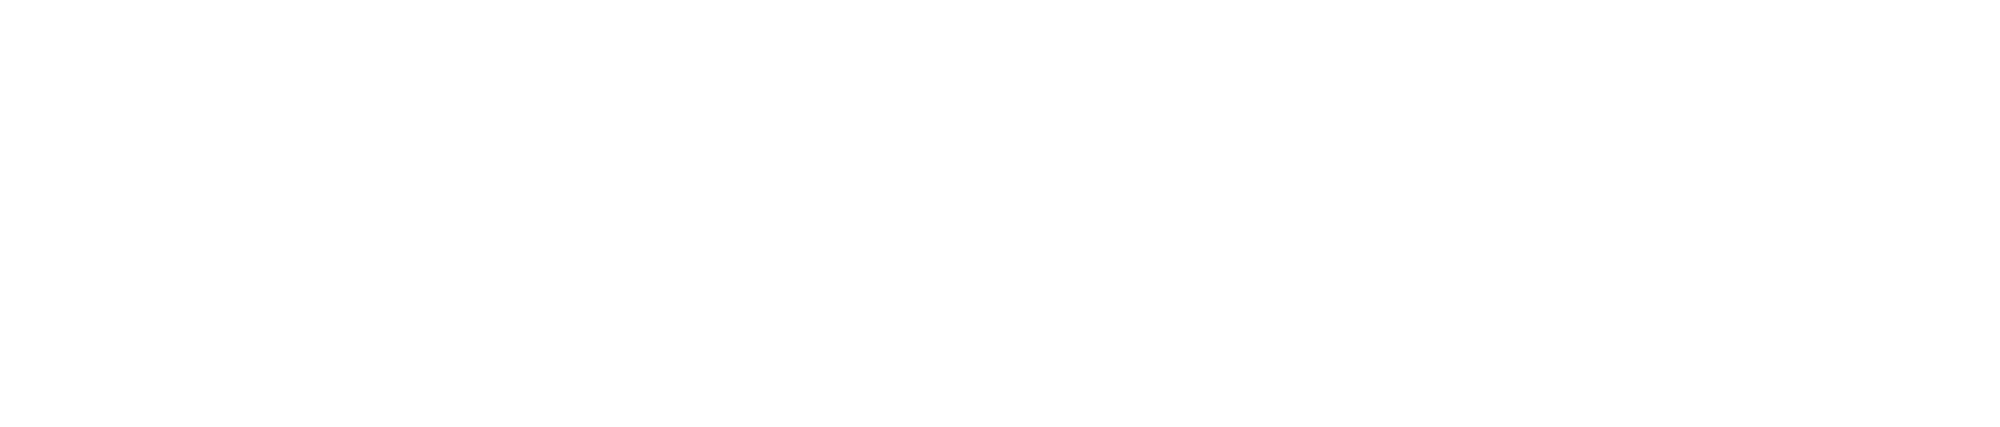 SILENTCITIES.SPACE